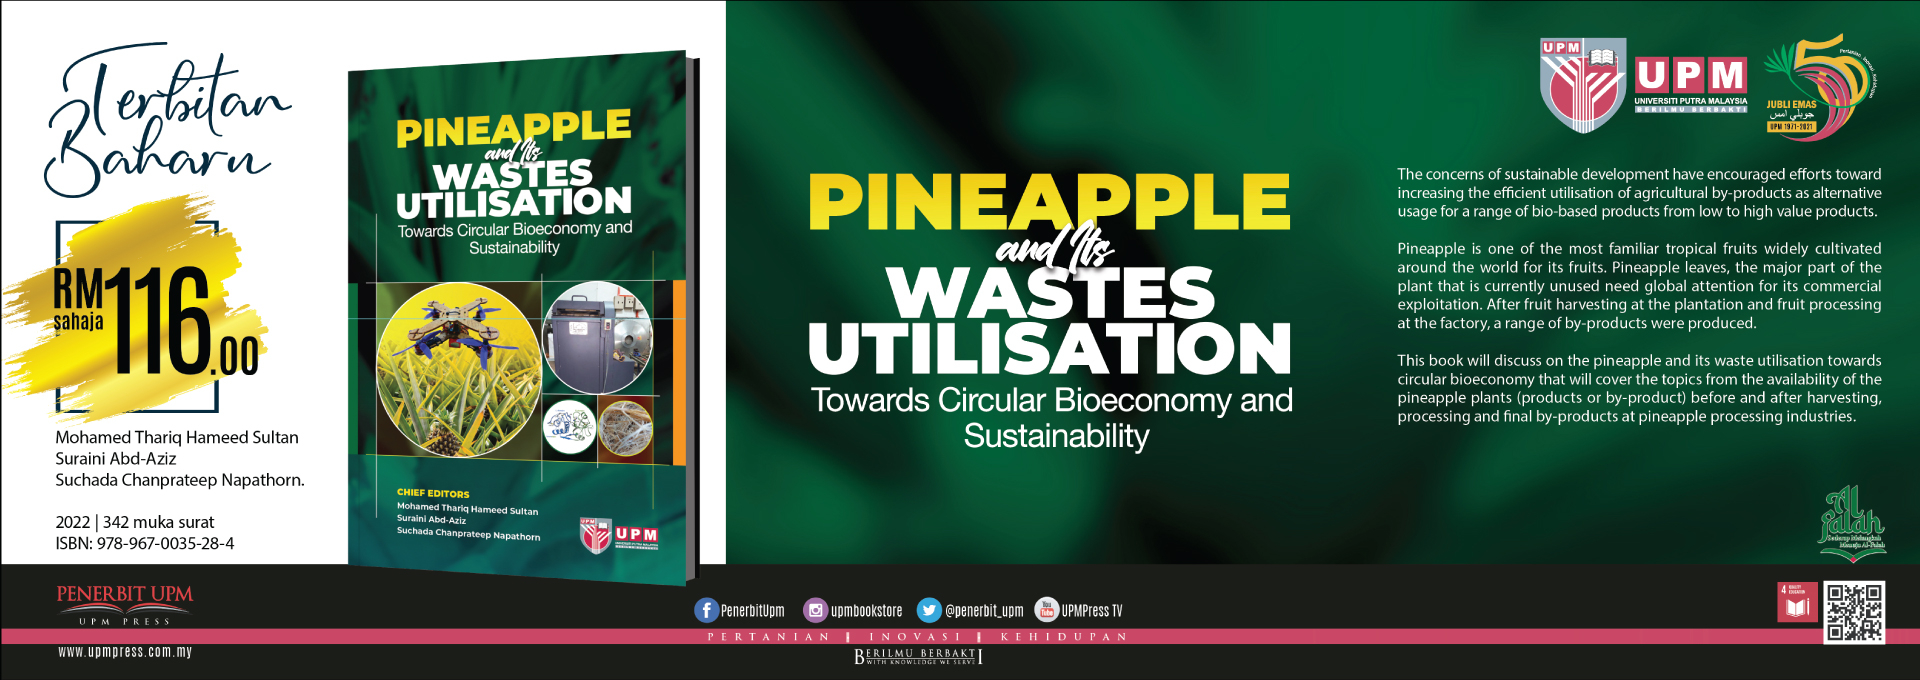 New Publication14_Pineapple